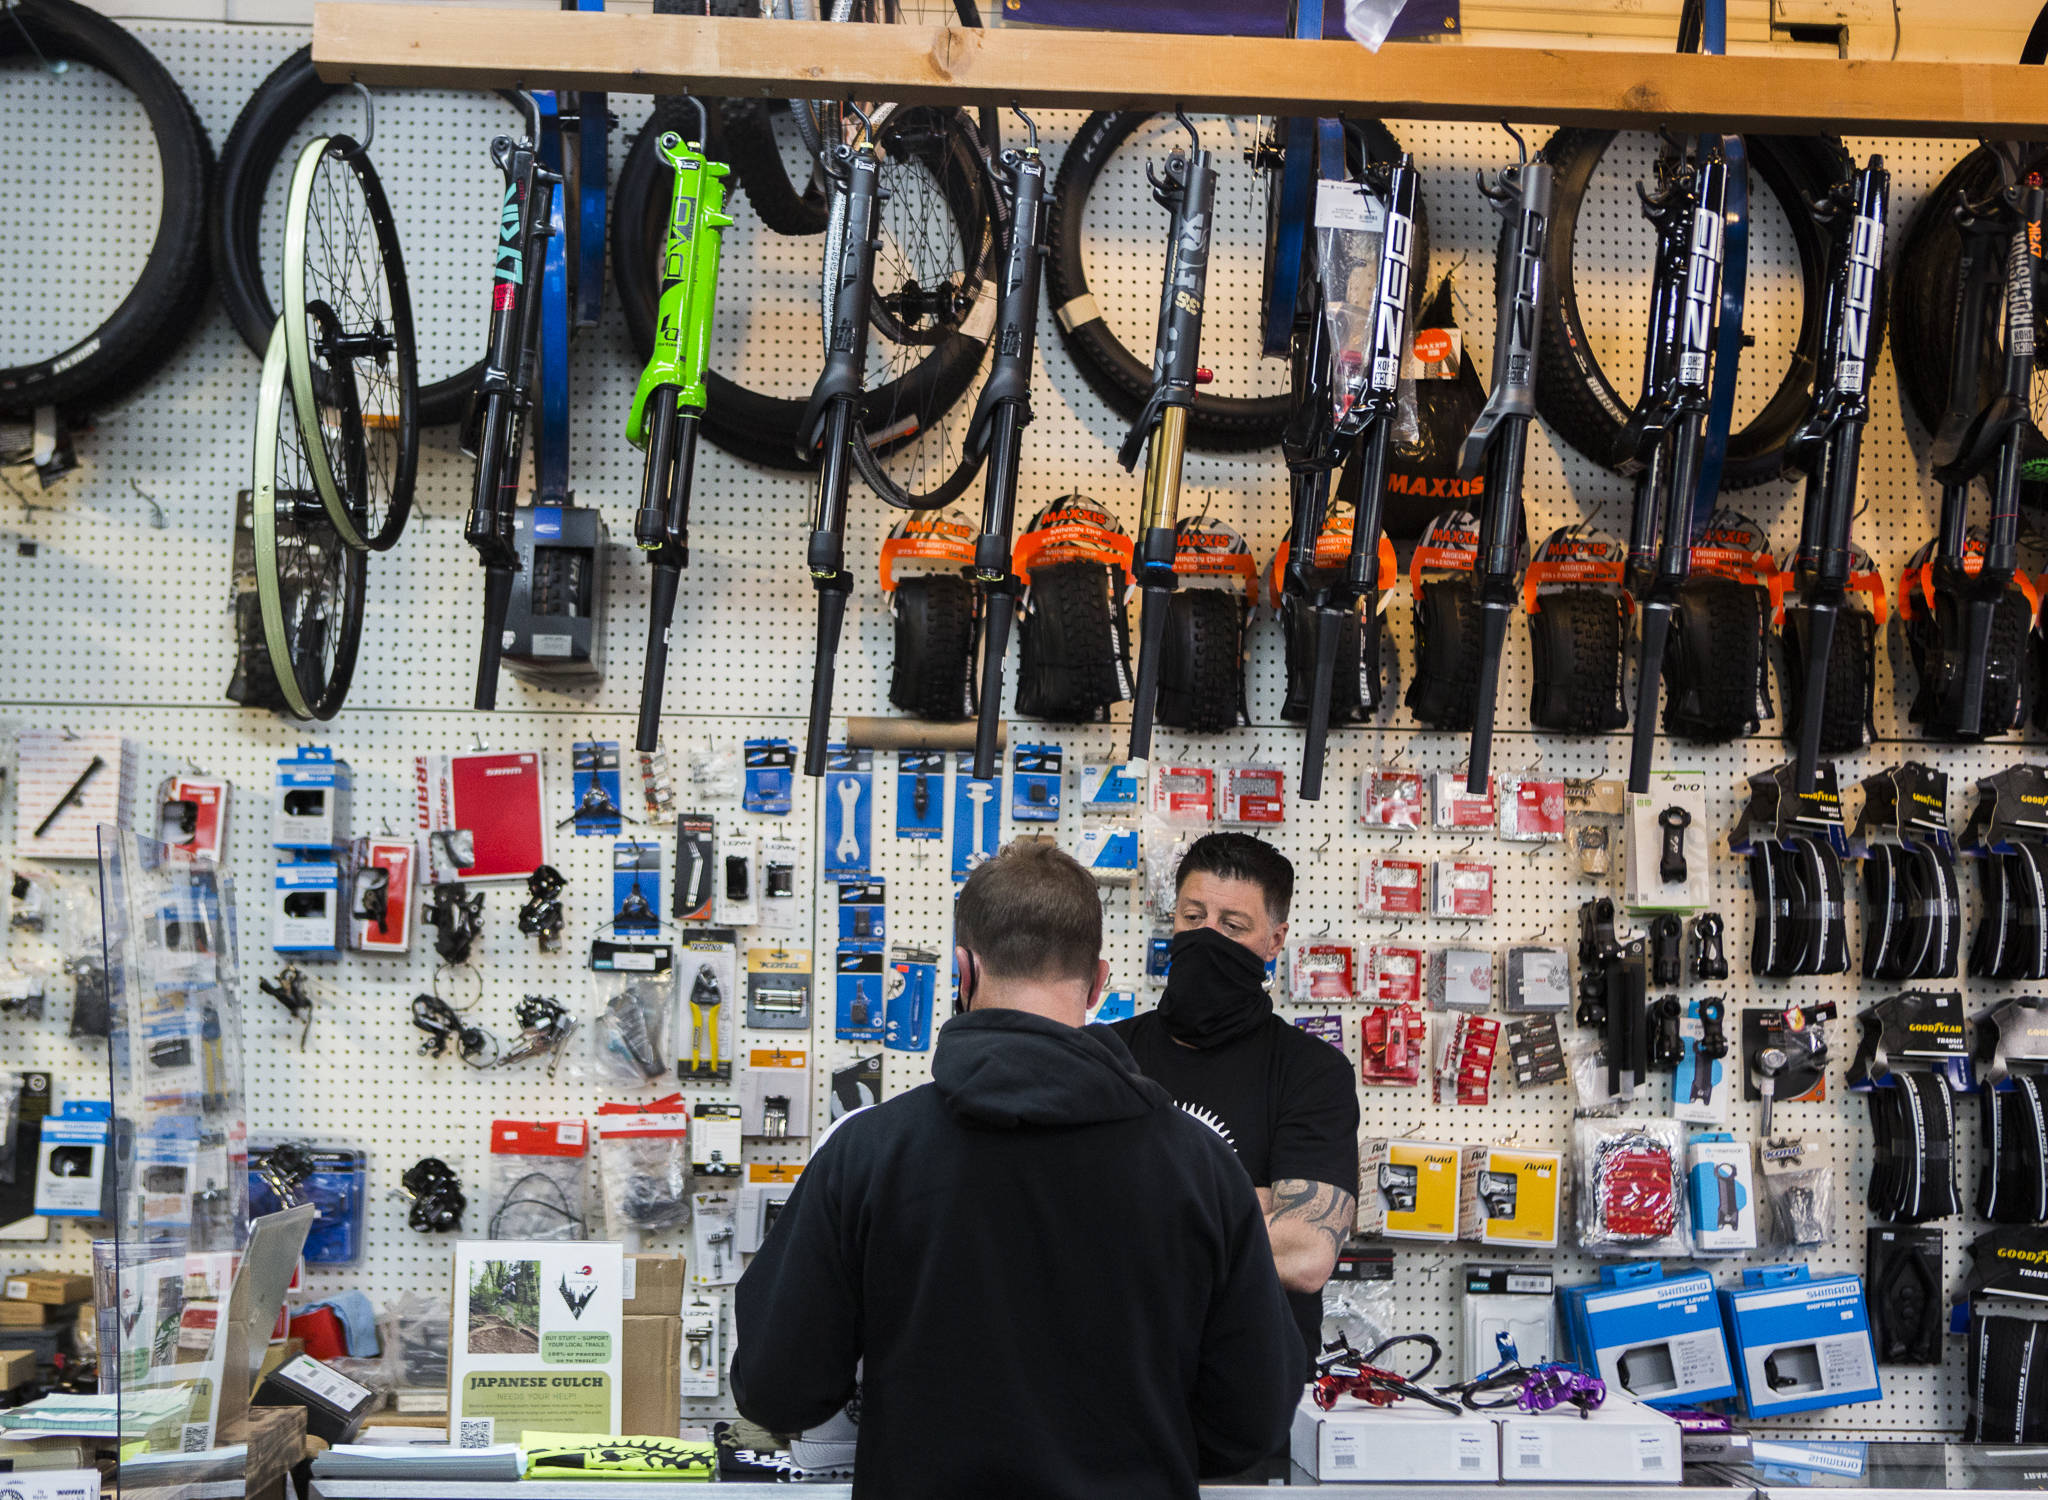 Jay Hiester, owner of Tim’s Bike Shop, helps a customer pick out a rear tire Friday in Everett. (Olivia Vanni / The Herald)